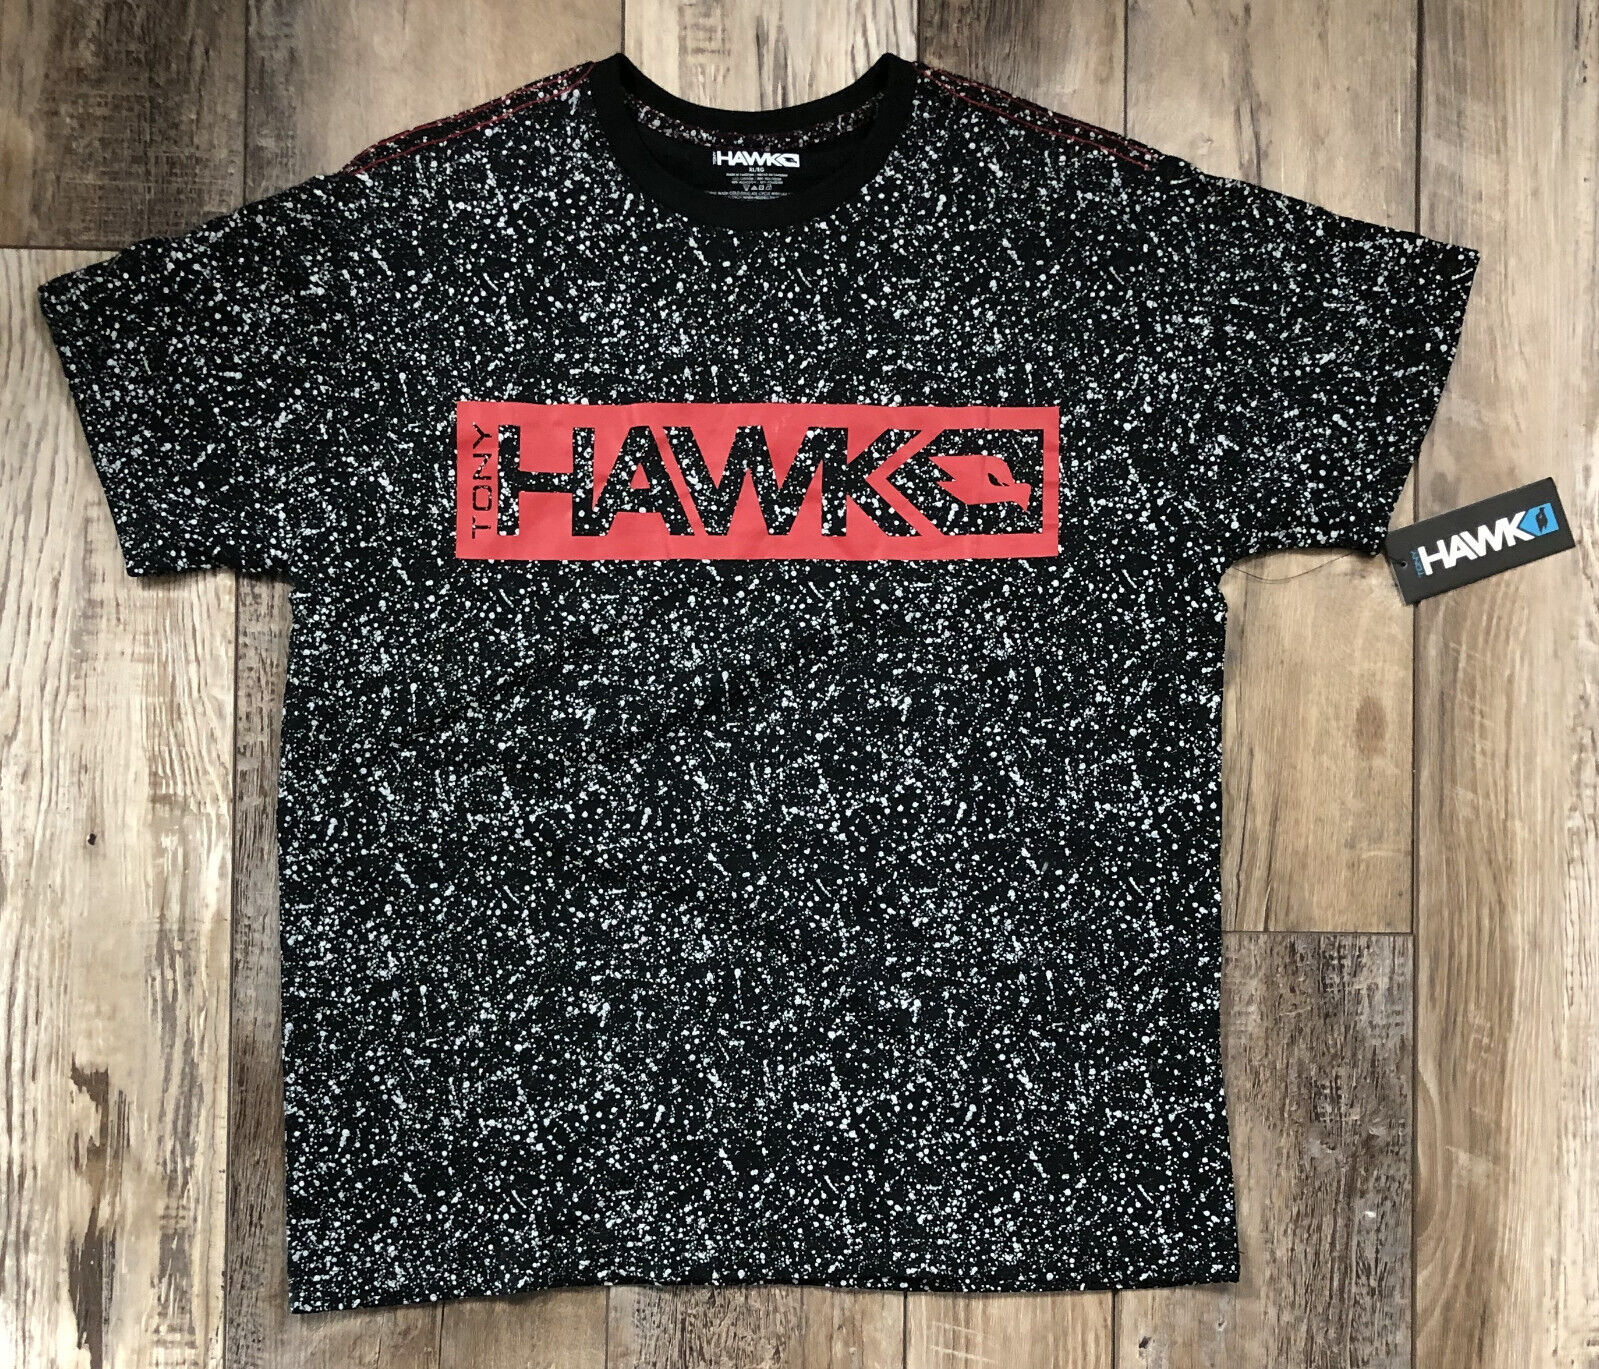 Primary image for Tony Hawk Splat Block Out SS Tee Shirt - Black w/Red Graphics - Size XL